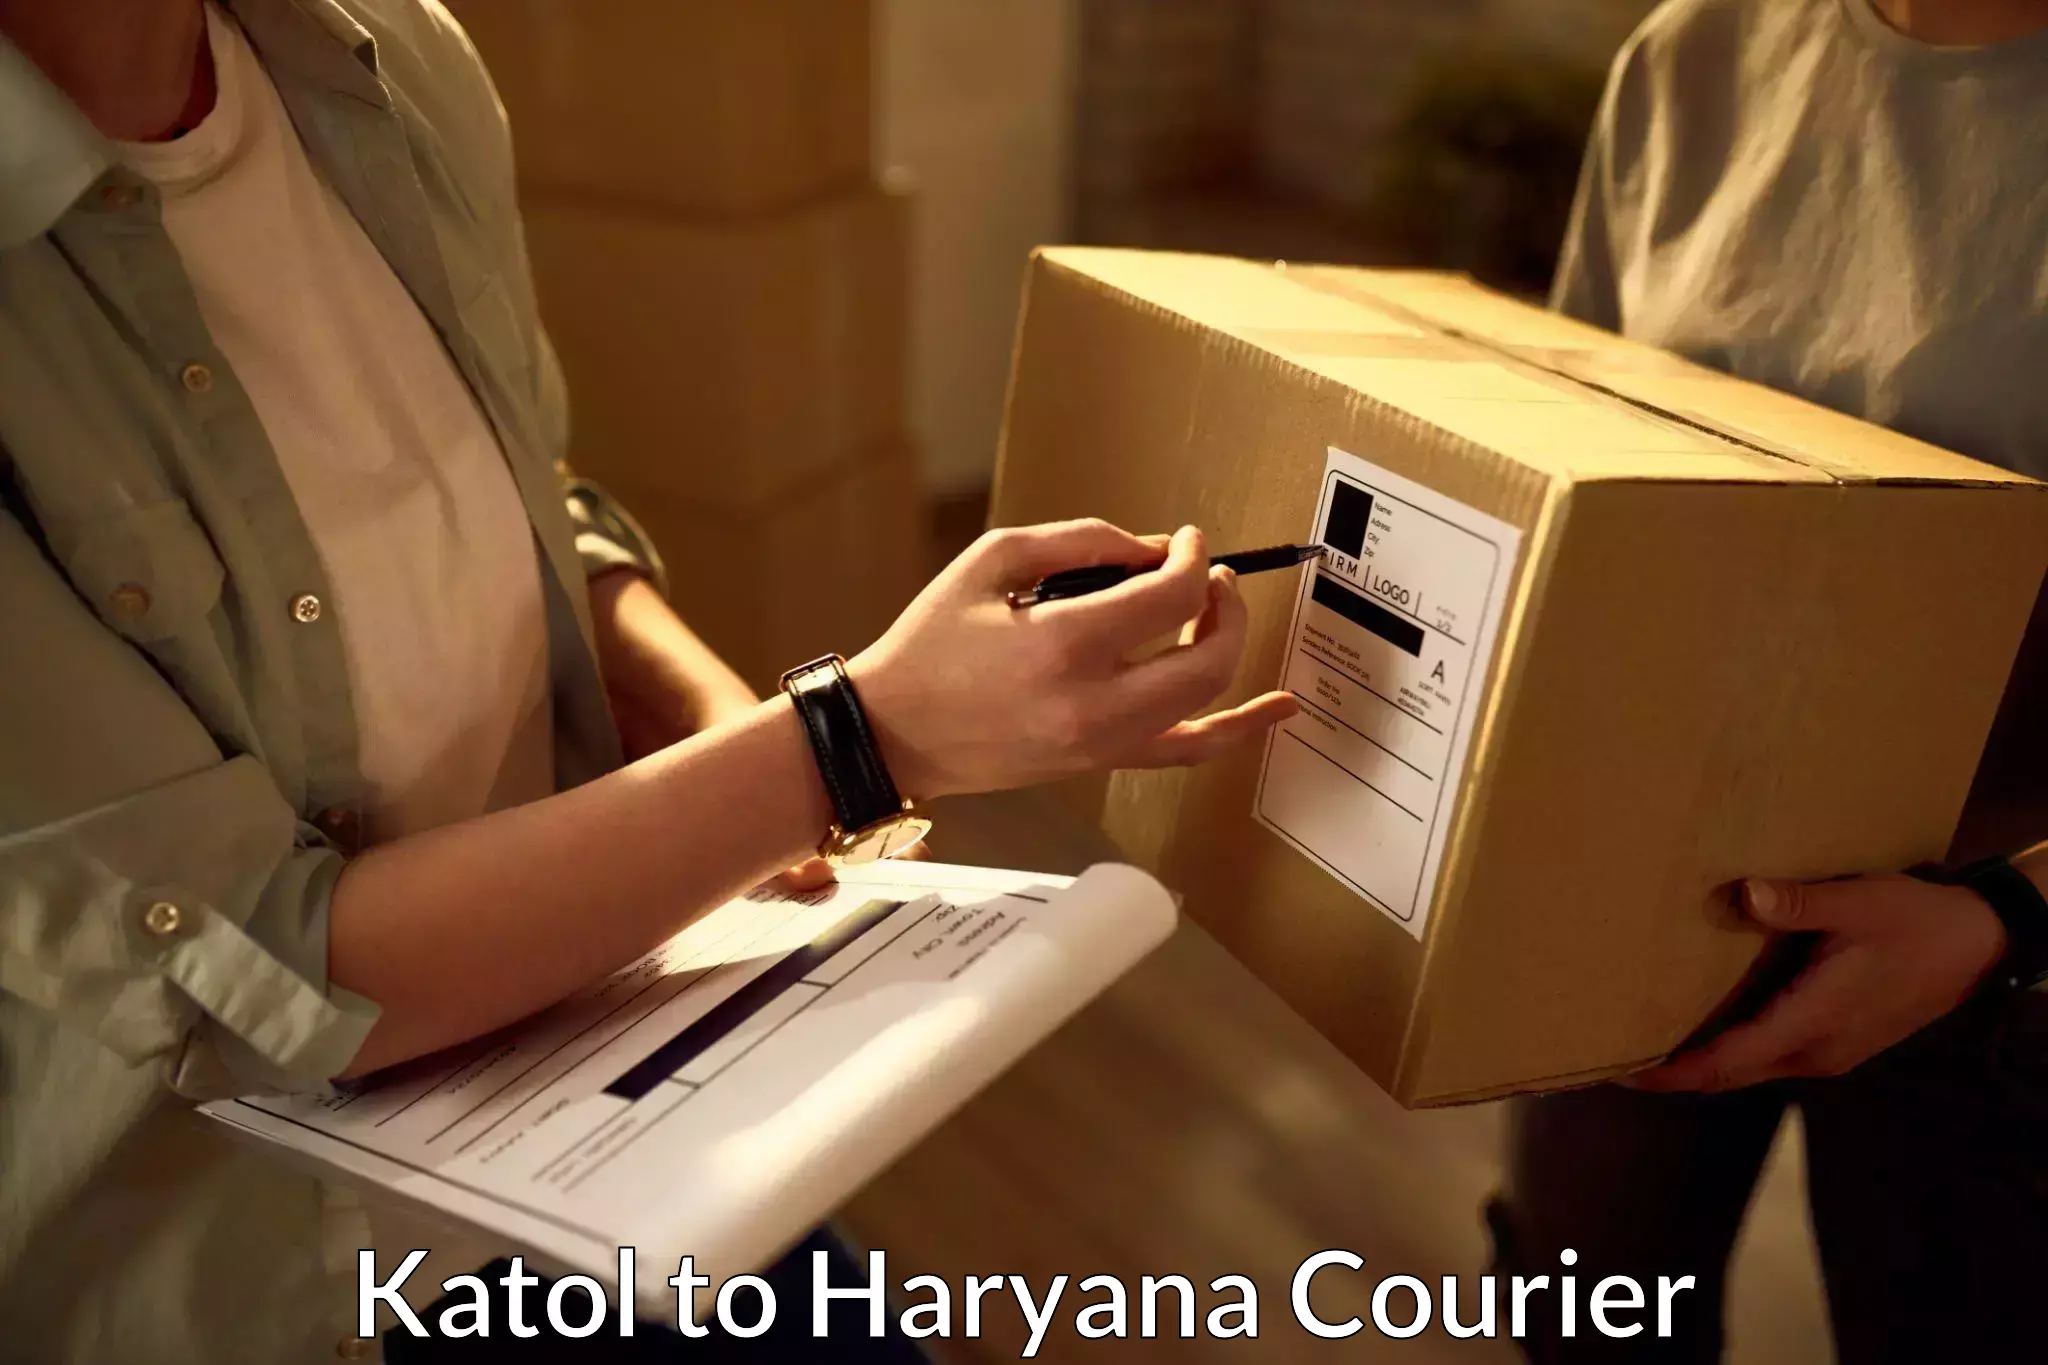 Multi-national courier services Katol to Haryana